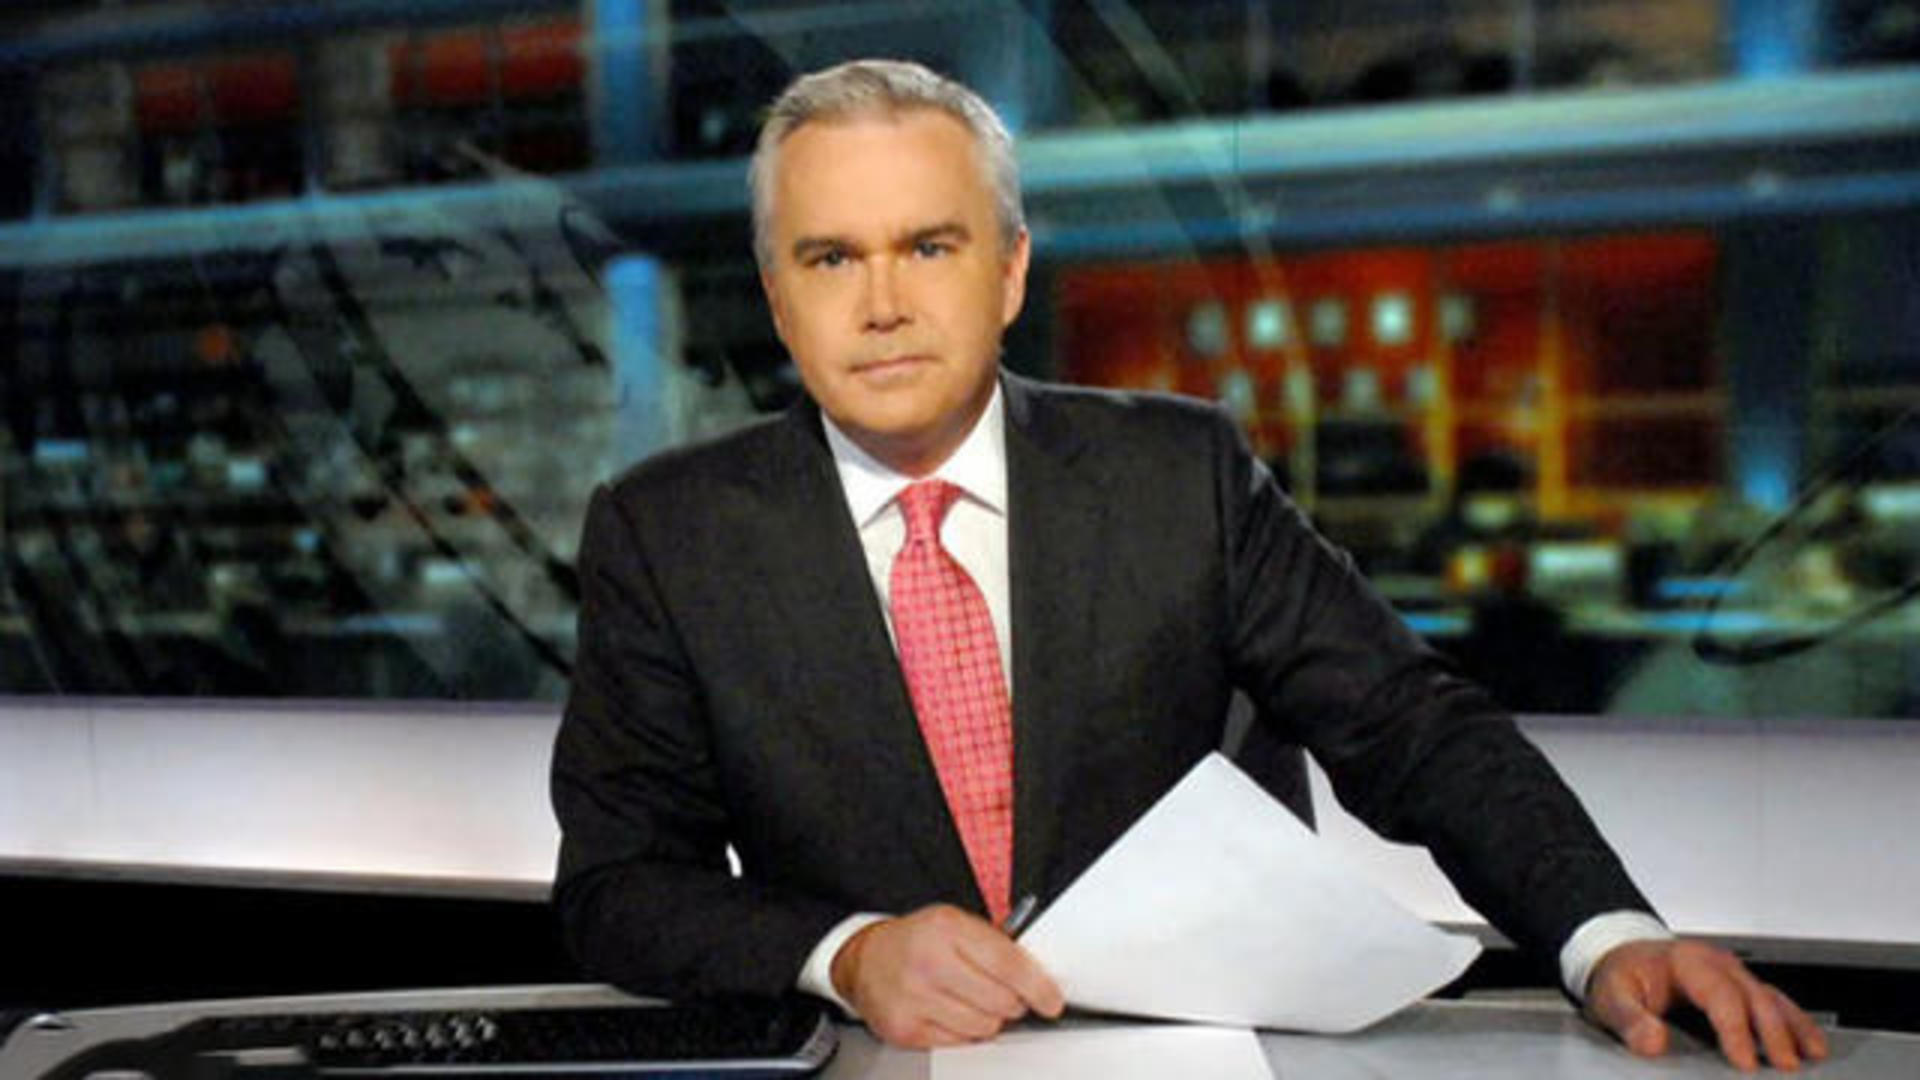 Huw Edwards, BBC presenter, named in connection with sex photo scandal photo